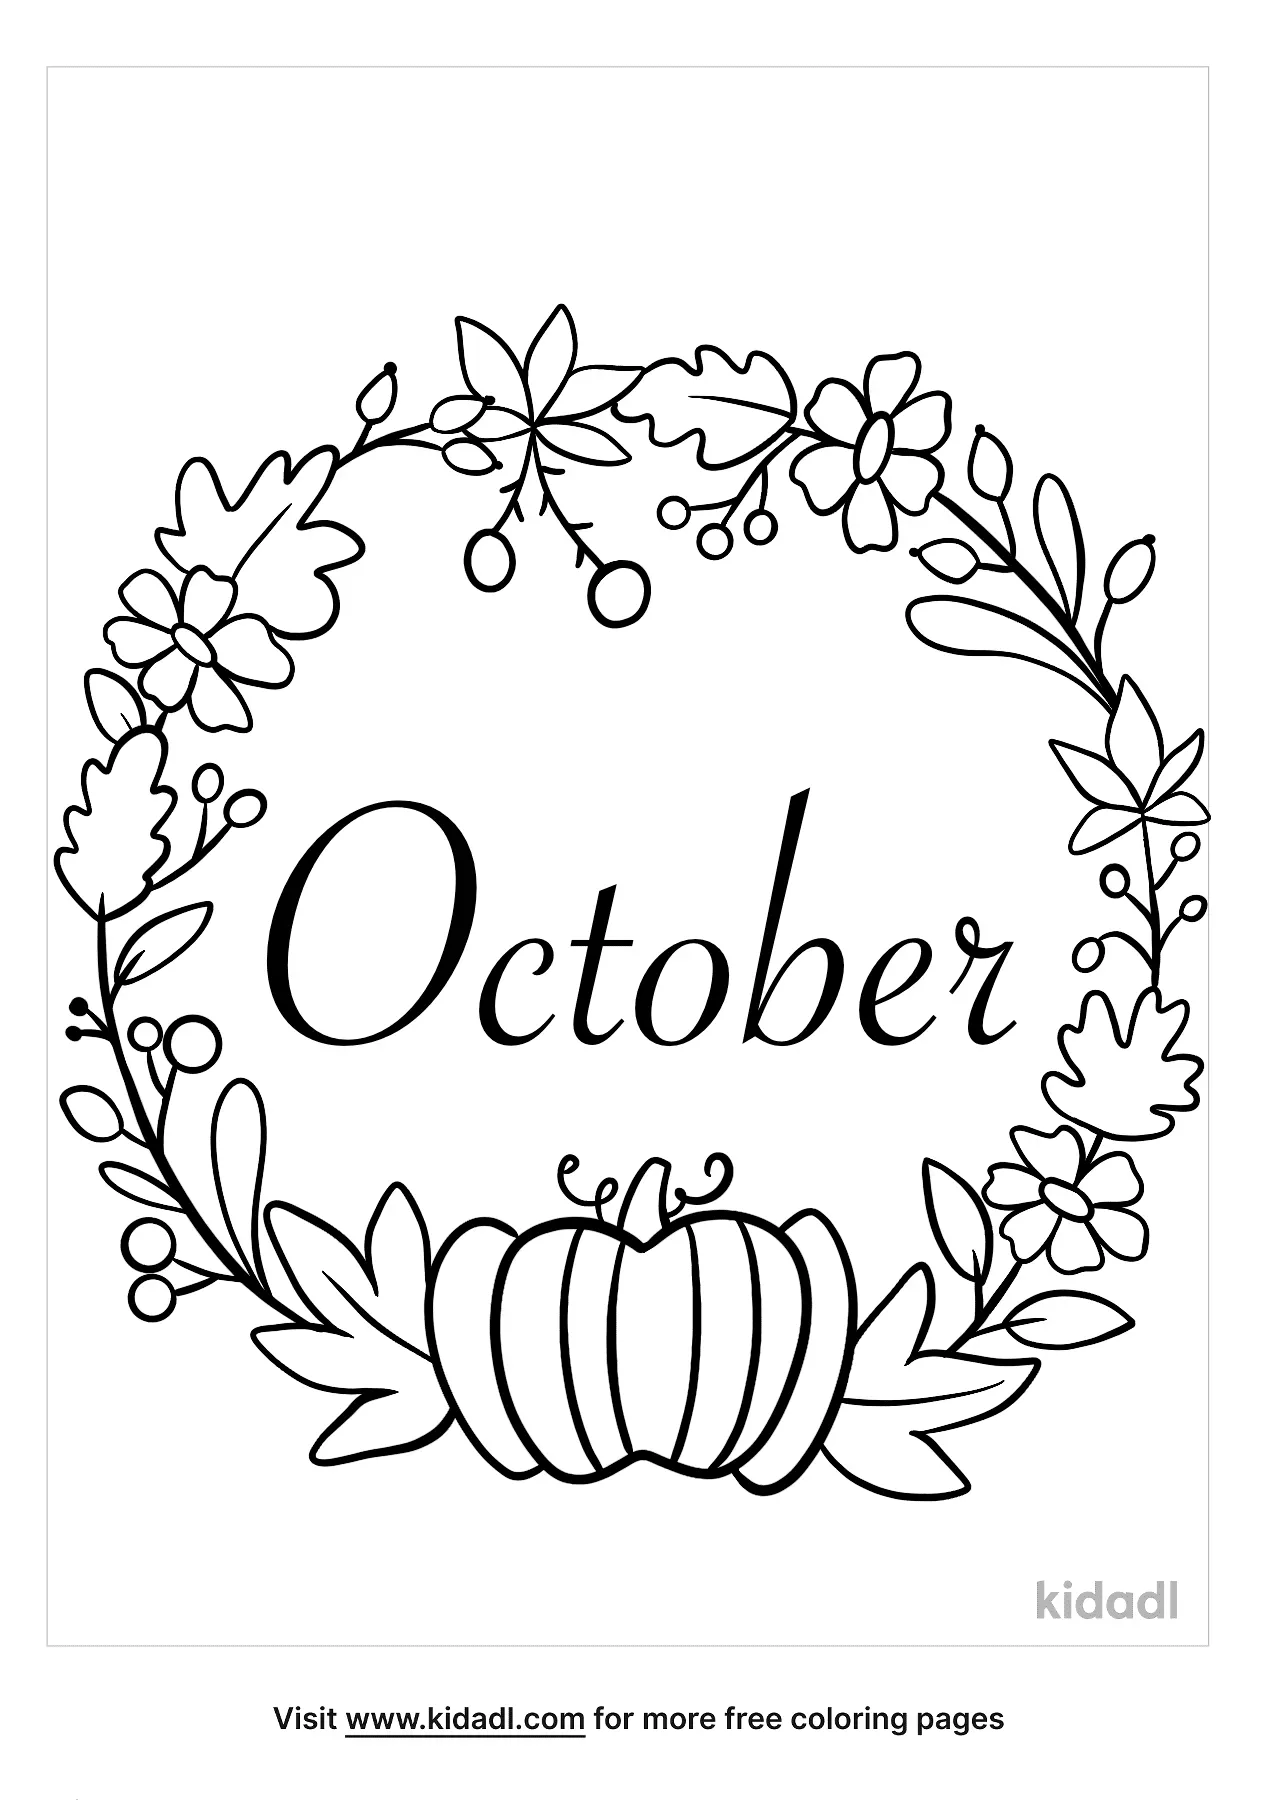 October Coloring Pages   Free Fall Coloring Pages   Kidadl